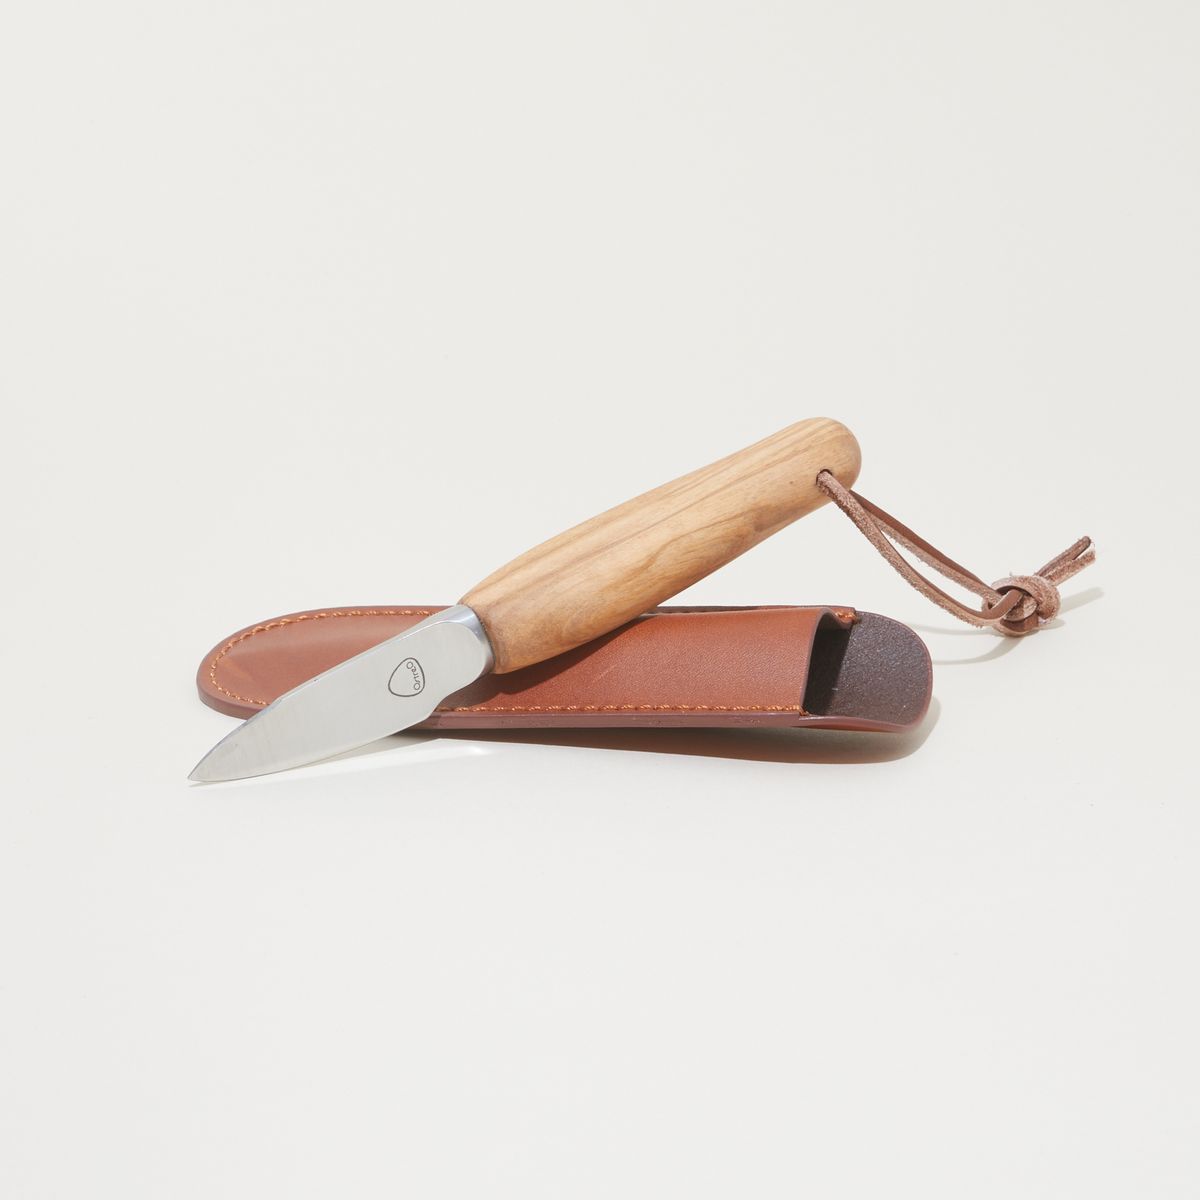 An oyster knife with a wooden handle resting on its leather sheath